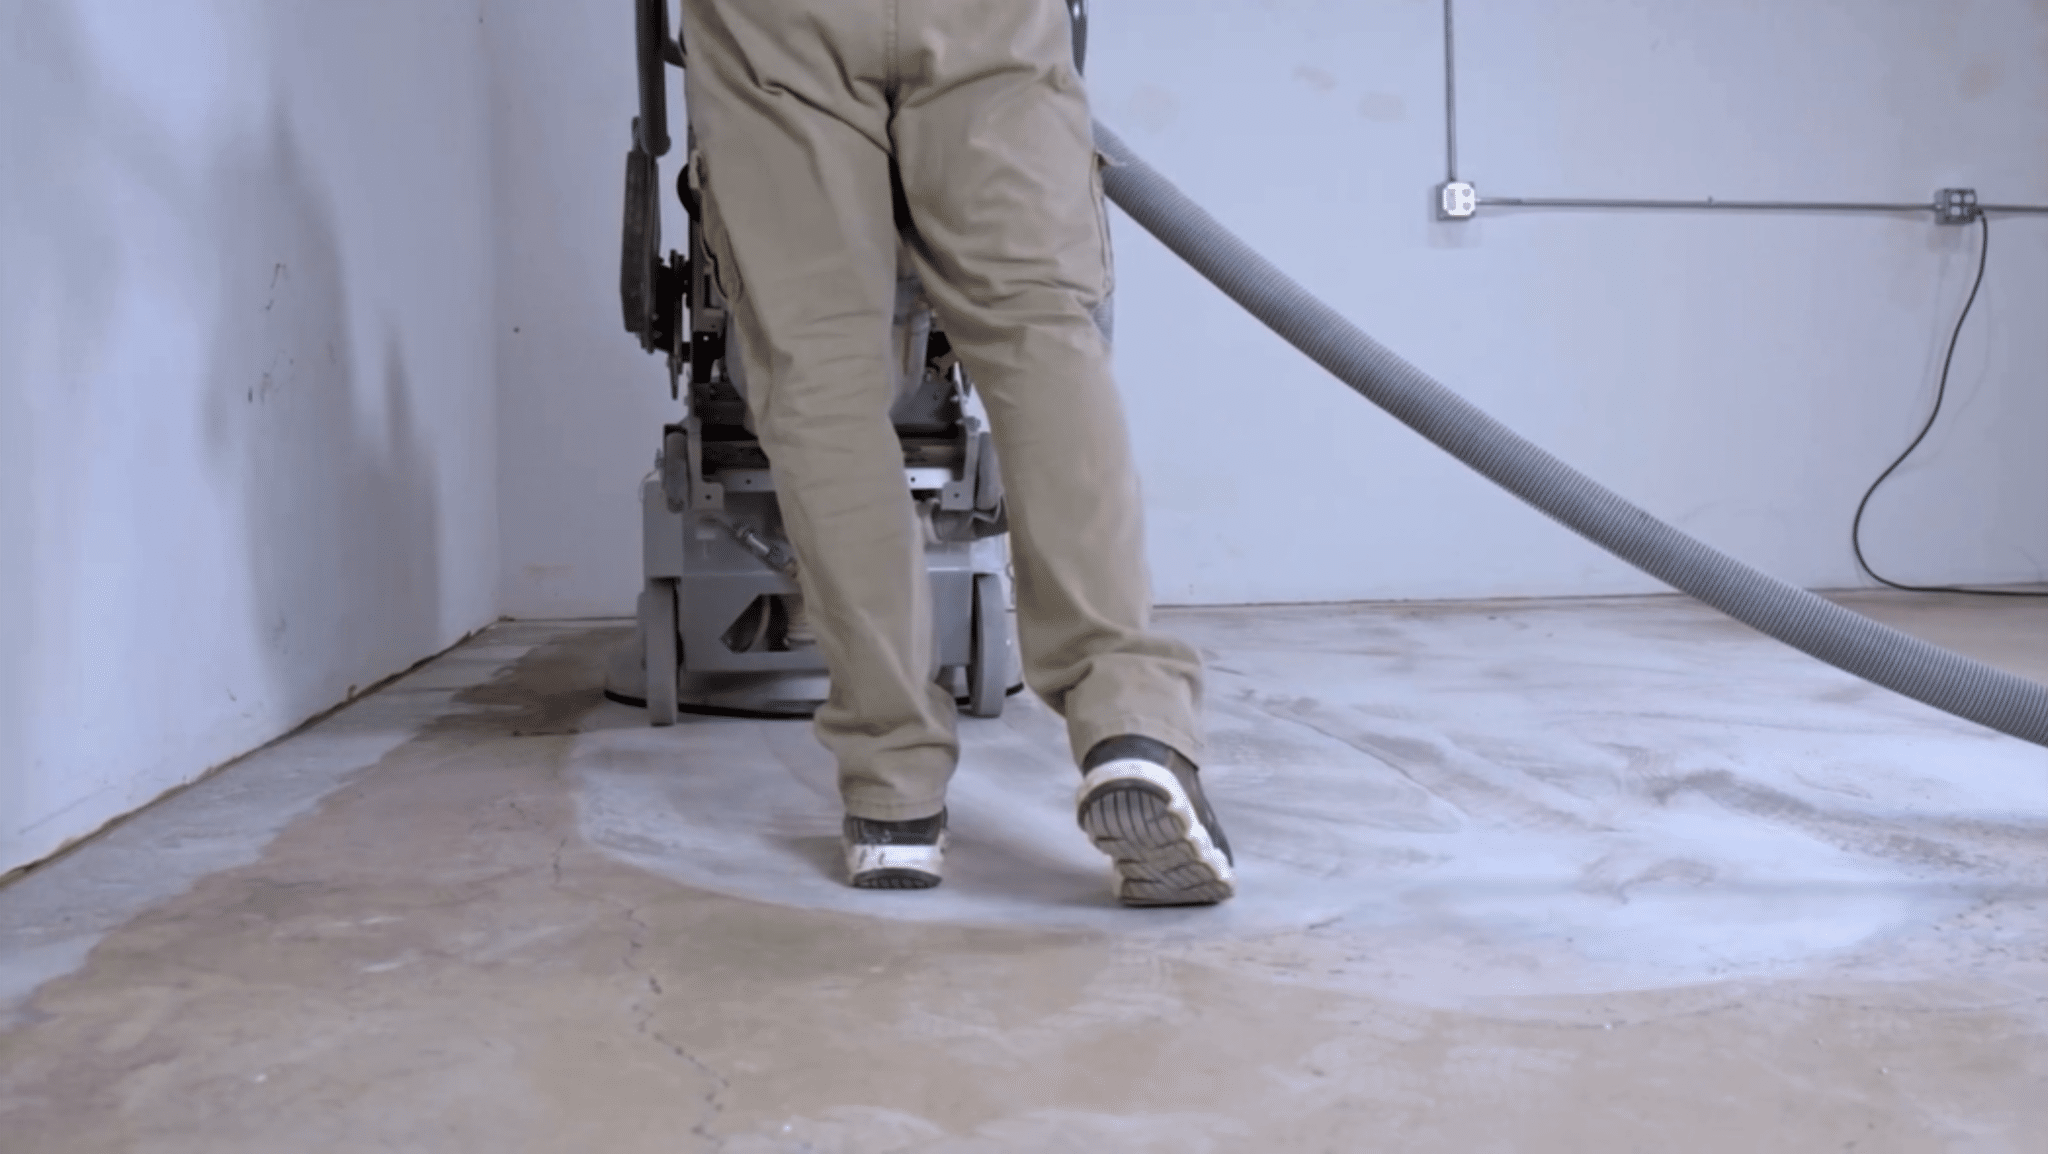 A person operates a large floor-cleaning machine with a hose in a room with a concrete floor, wearing tan work clothes and sneakers.